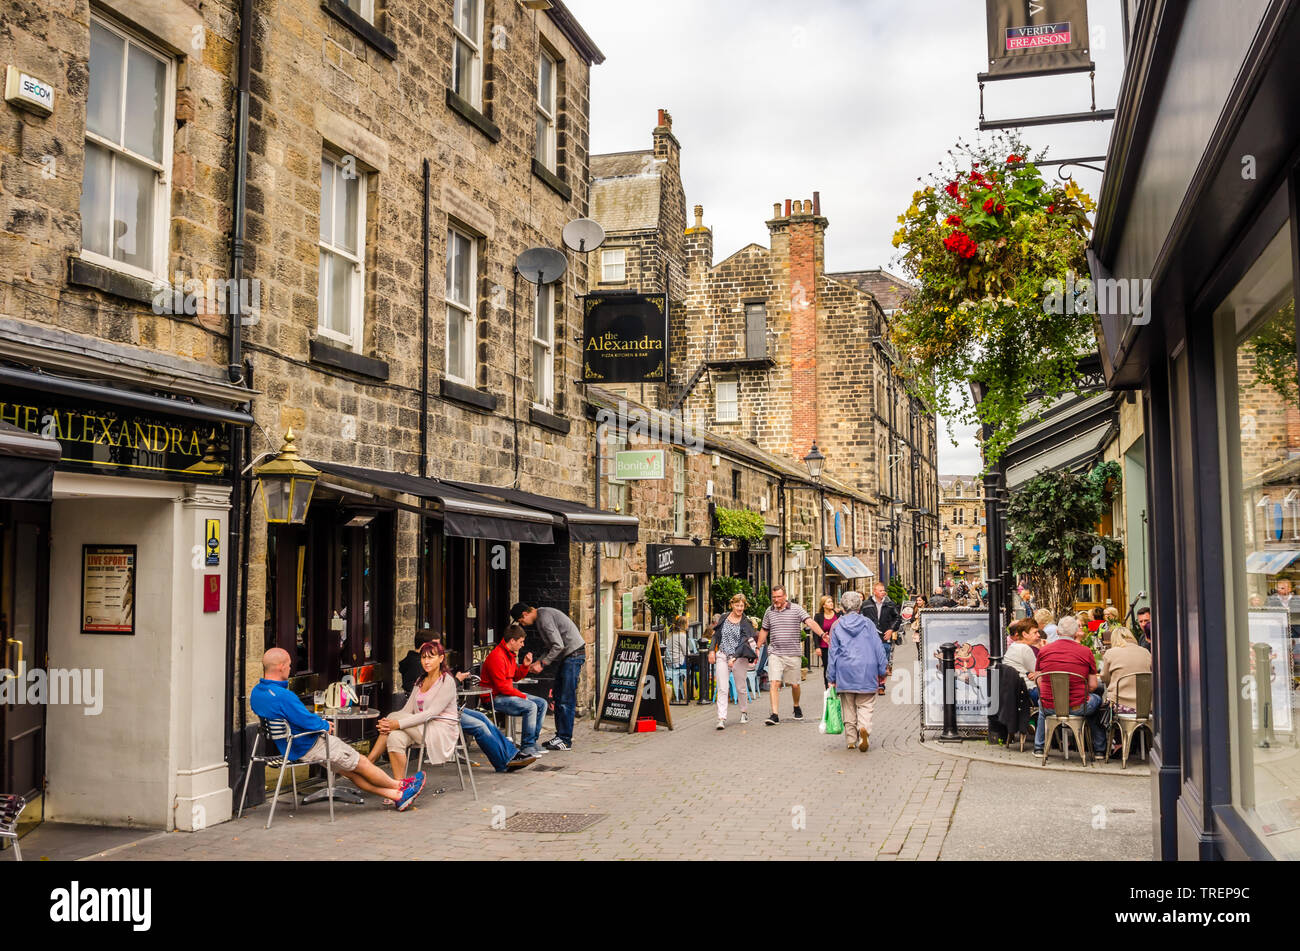 People enjoying a warm Autumn day in a cobbled Street lined with Restaurant and Shops in Harrogate, England, UK. Stock Photo